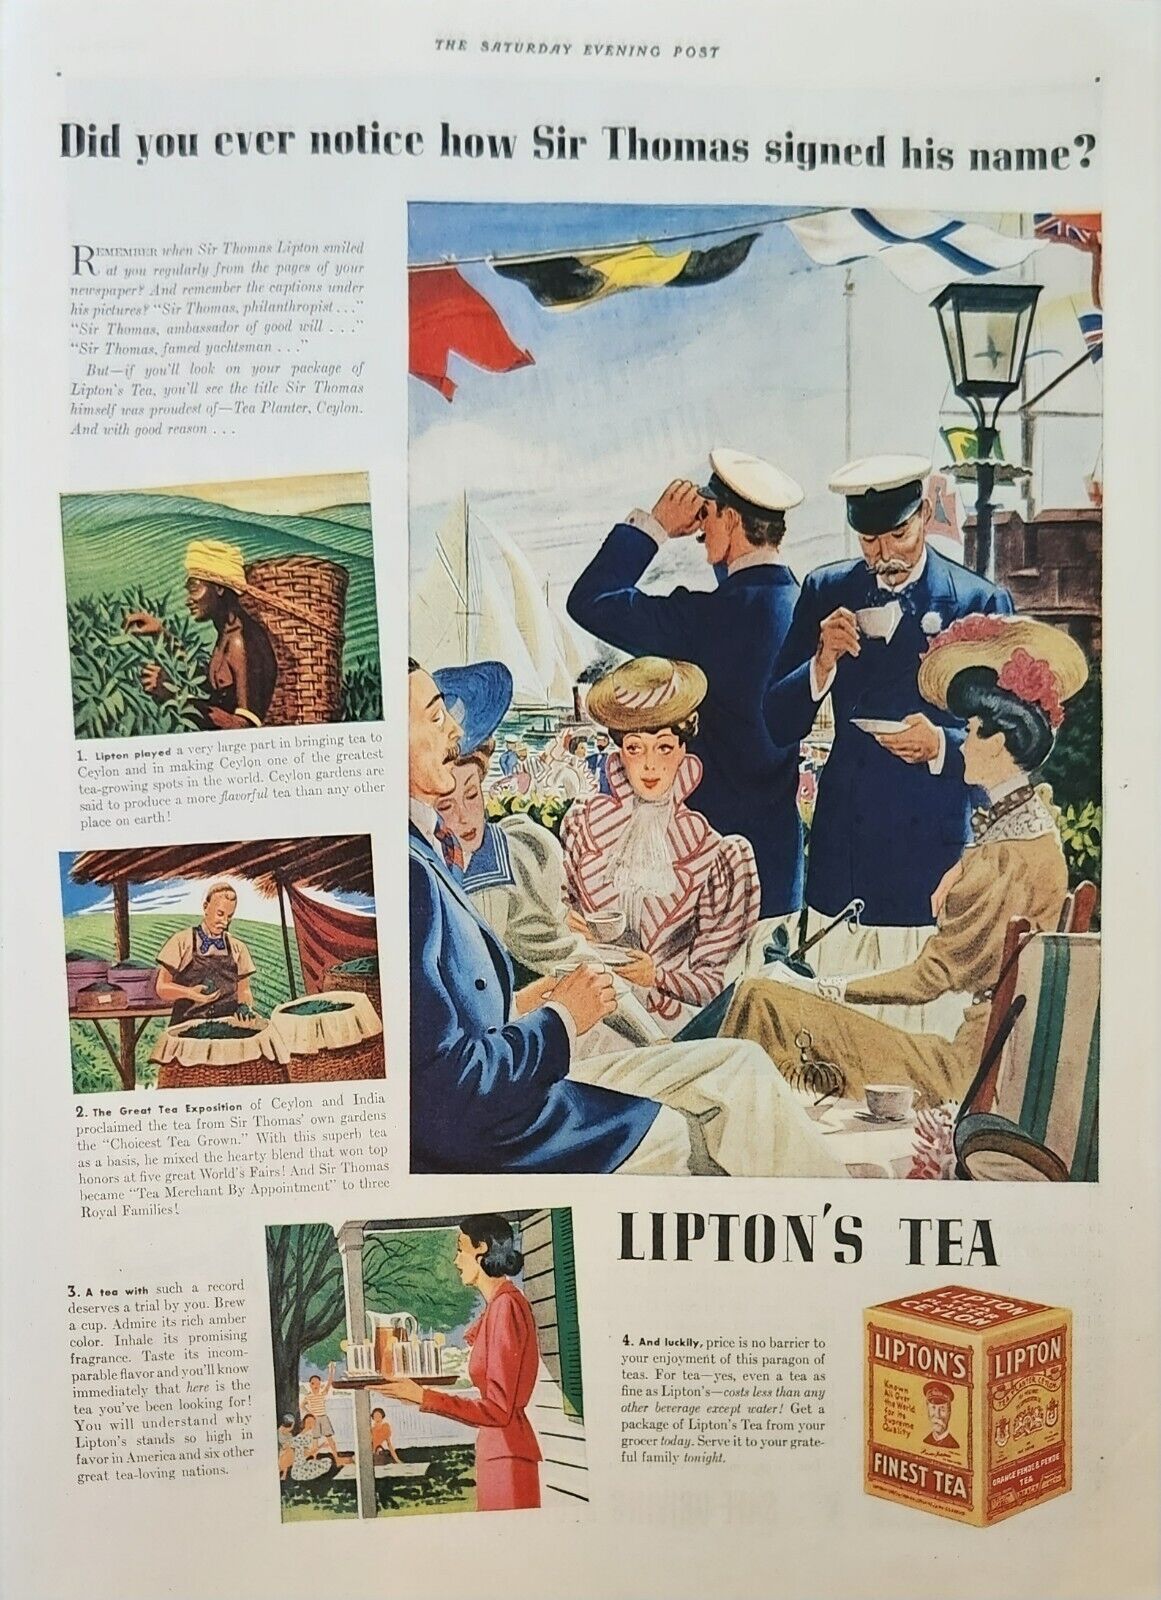 1938 Lipton Tea Vintage Ad did you ever notice how Sir Thomas signed his name